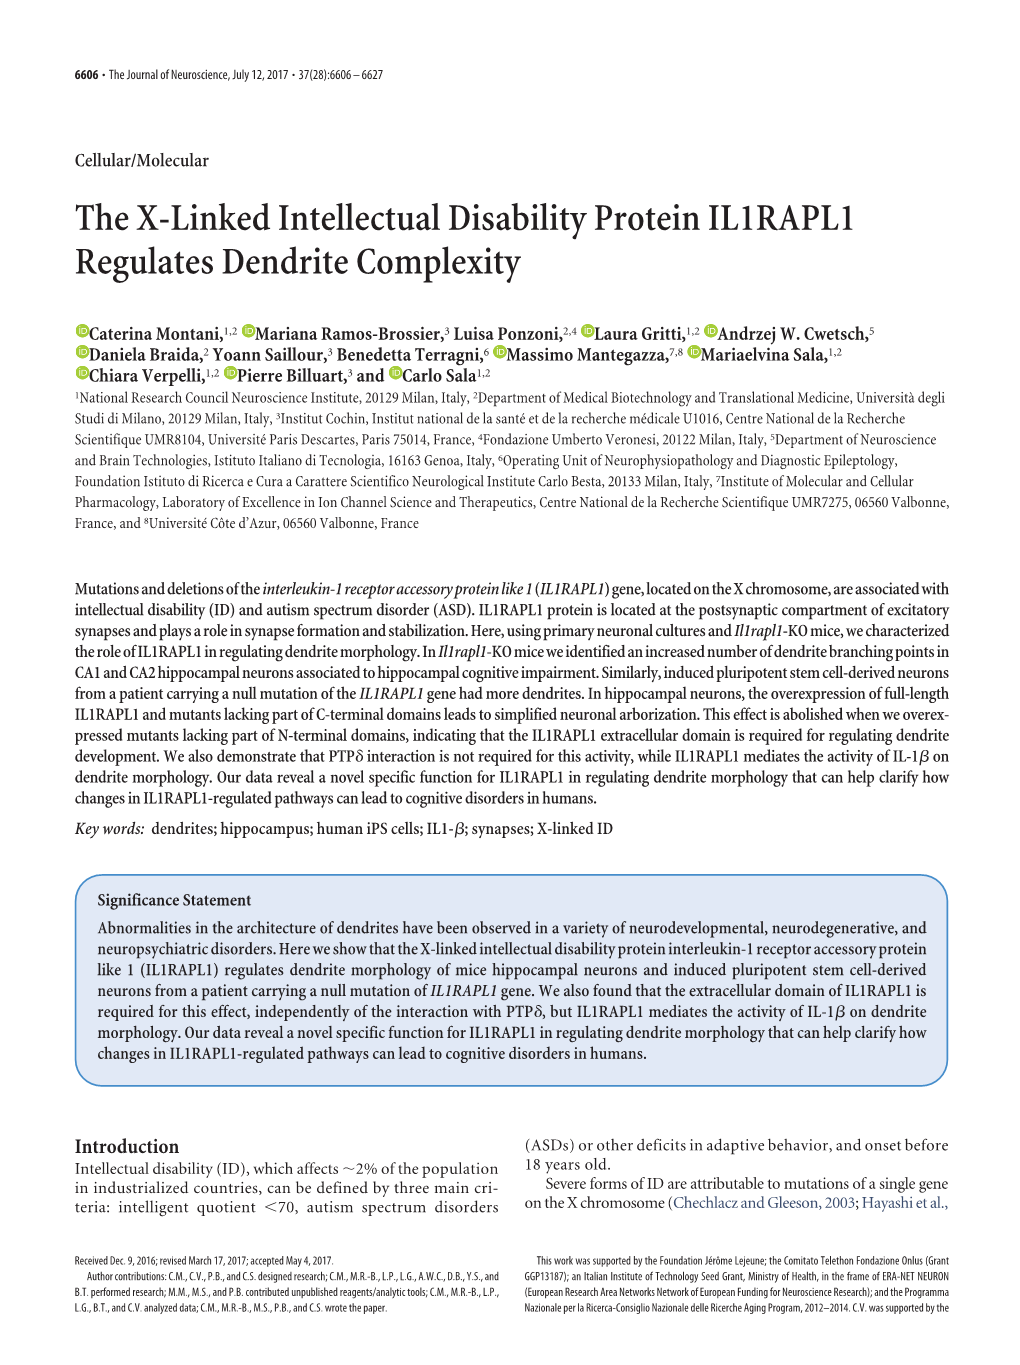 The X-Linked Intellectual Disability Protein IL1RAPL1 Regulates Dendrite Complexity